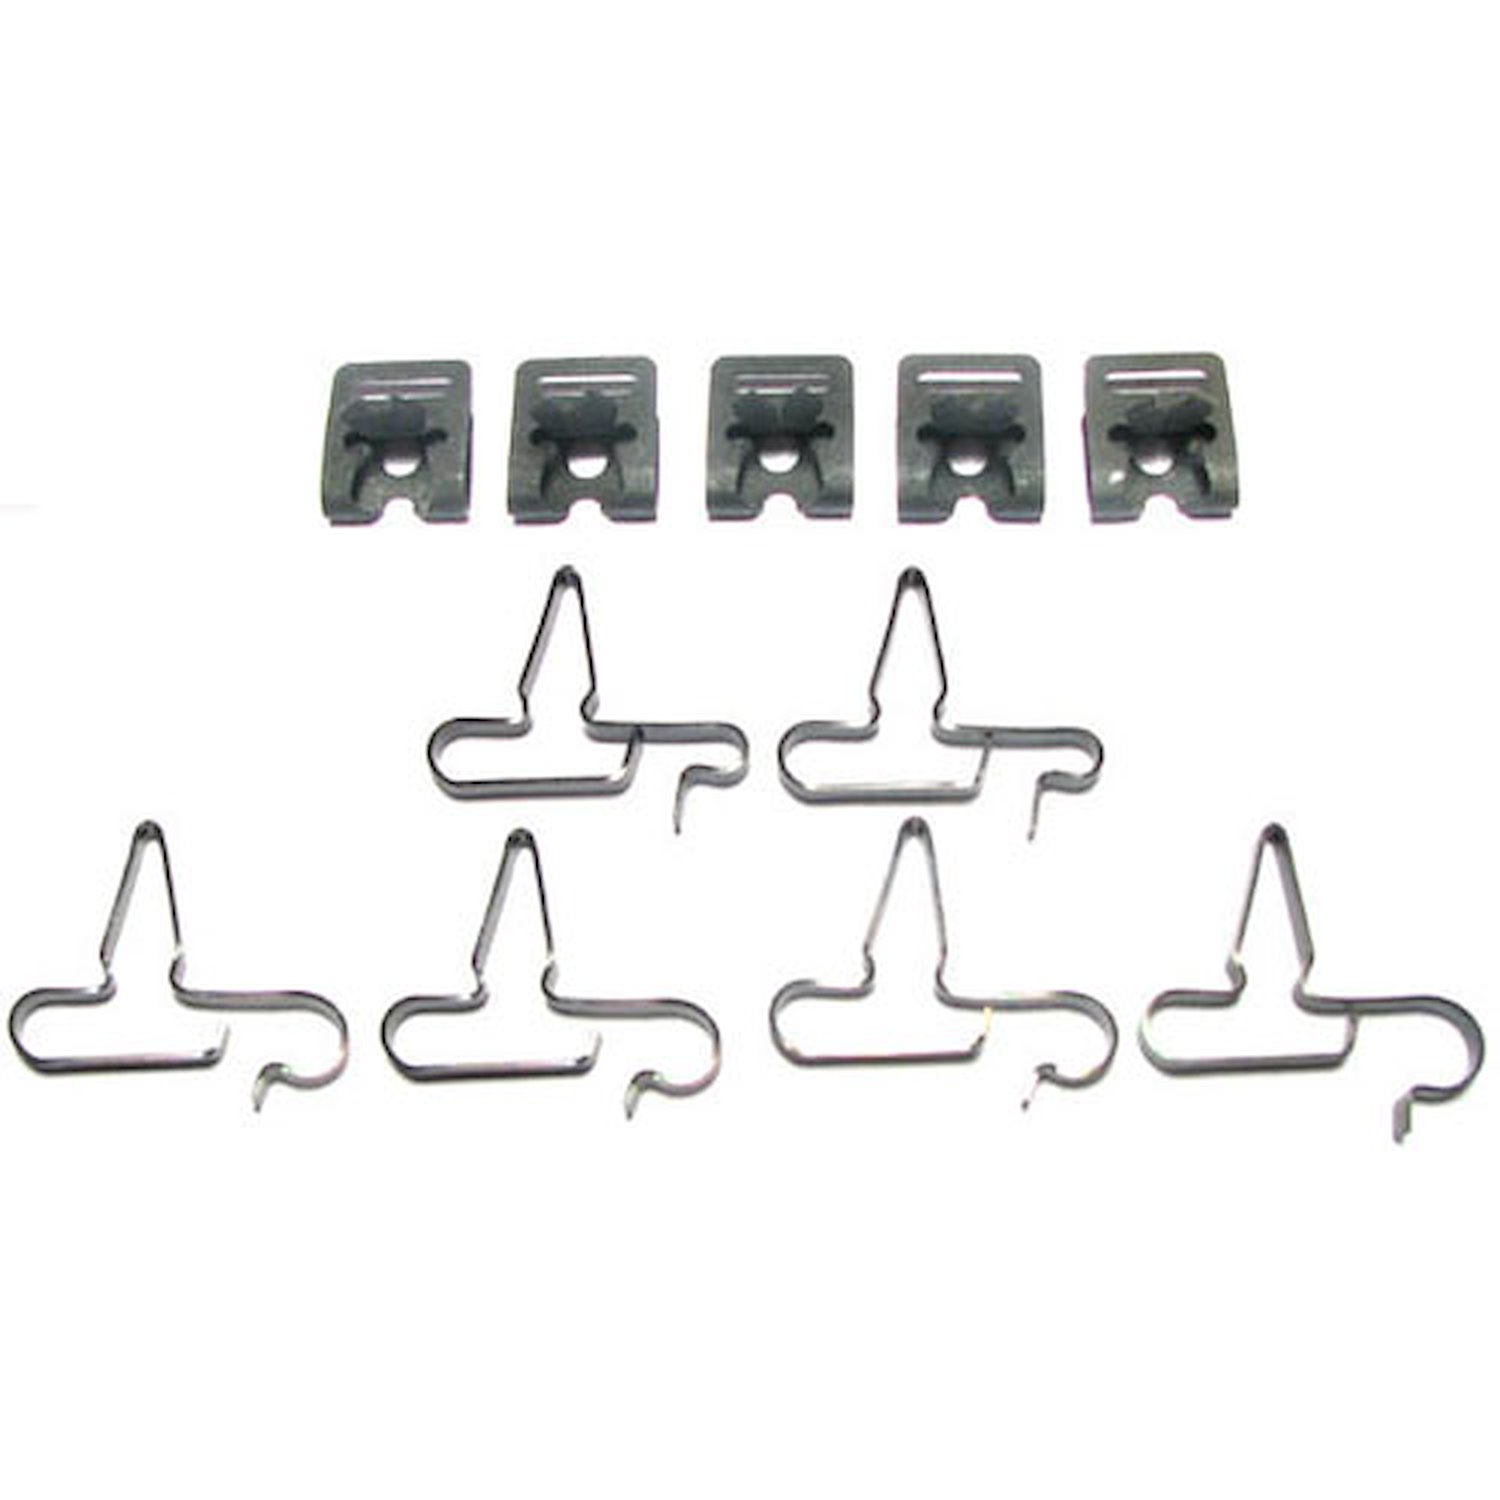 58 -62 All Cars - Brake AND Fuel Clip Set